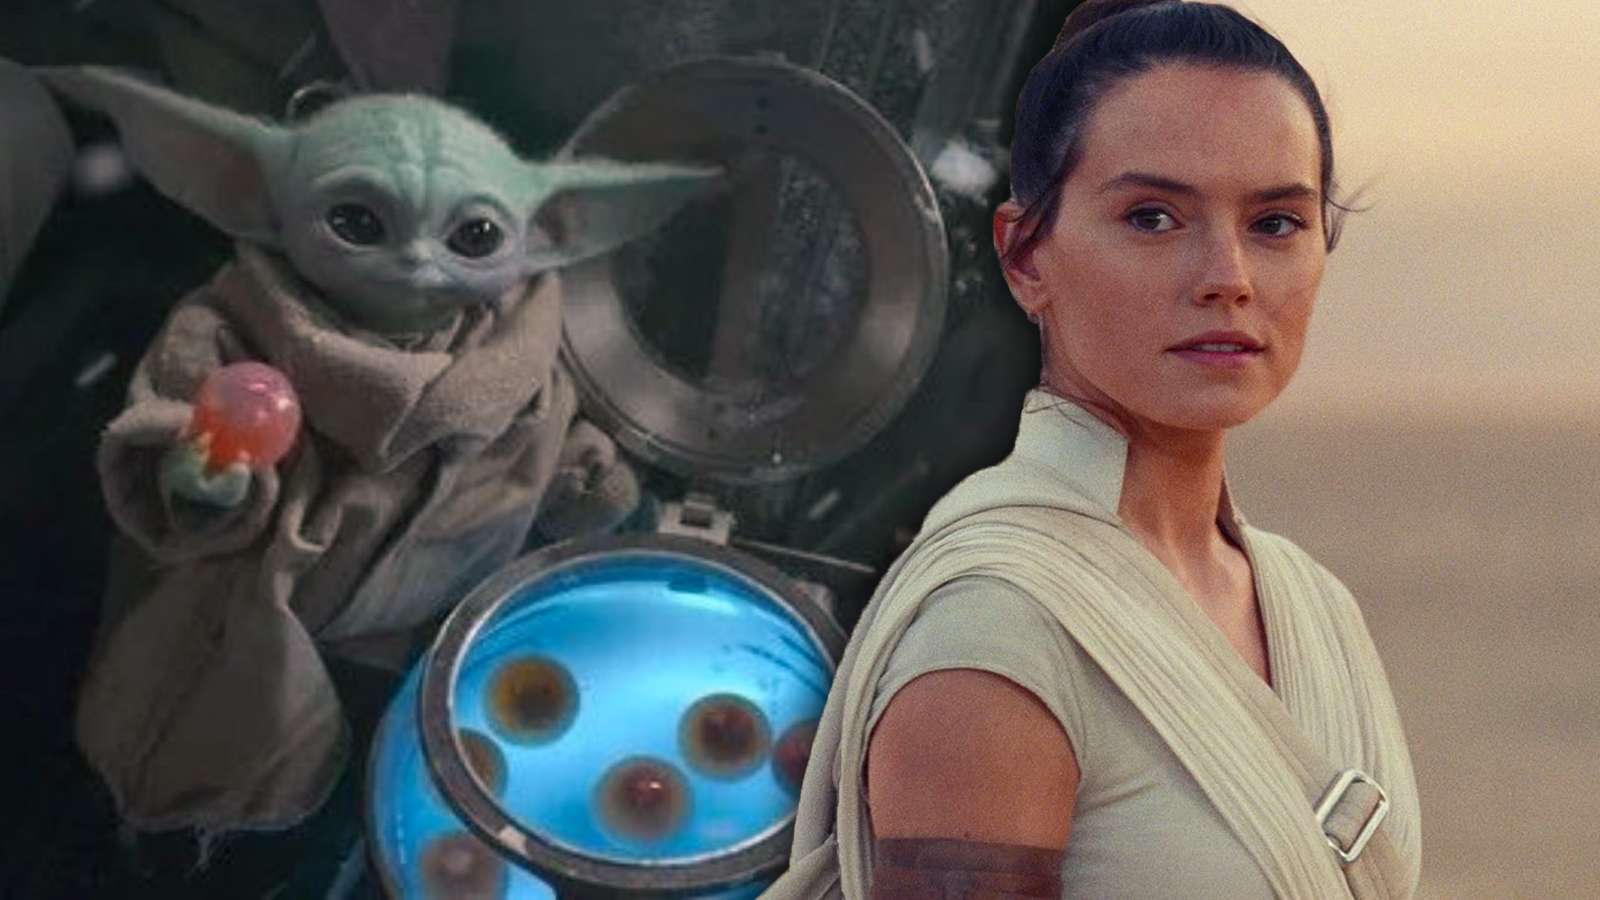 Why Baby Yoda Ate the Eggs in The Mandalorian - Star Wars Fan